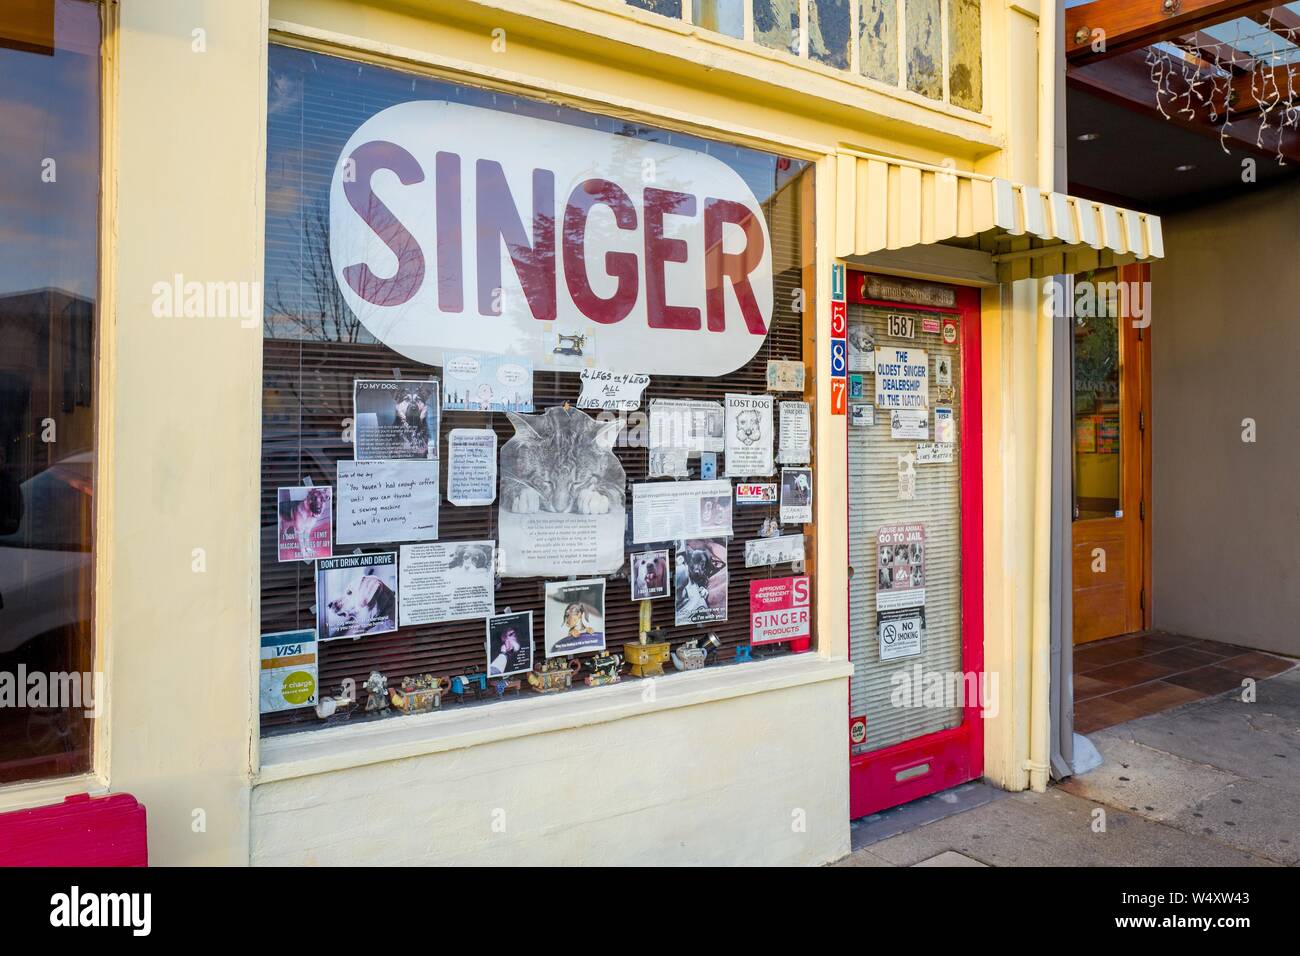 Facade of Singer sewing machine dealership on Solano Avenue in Berkeley, California, with eclectic signage in shop window, including sign claiming to be oldest operating Singer dealership, December 18, 2018. () Stock Photo